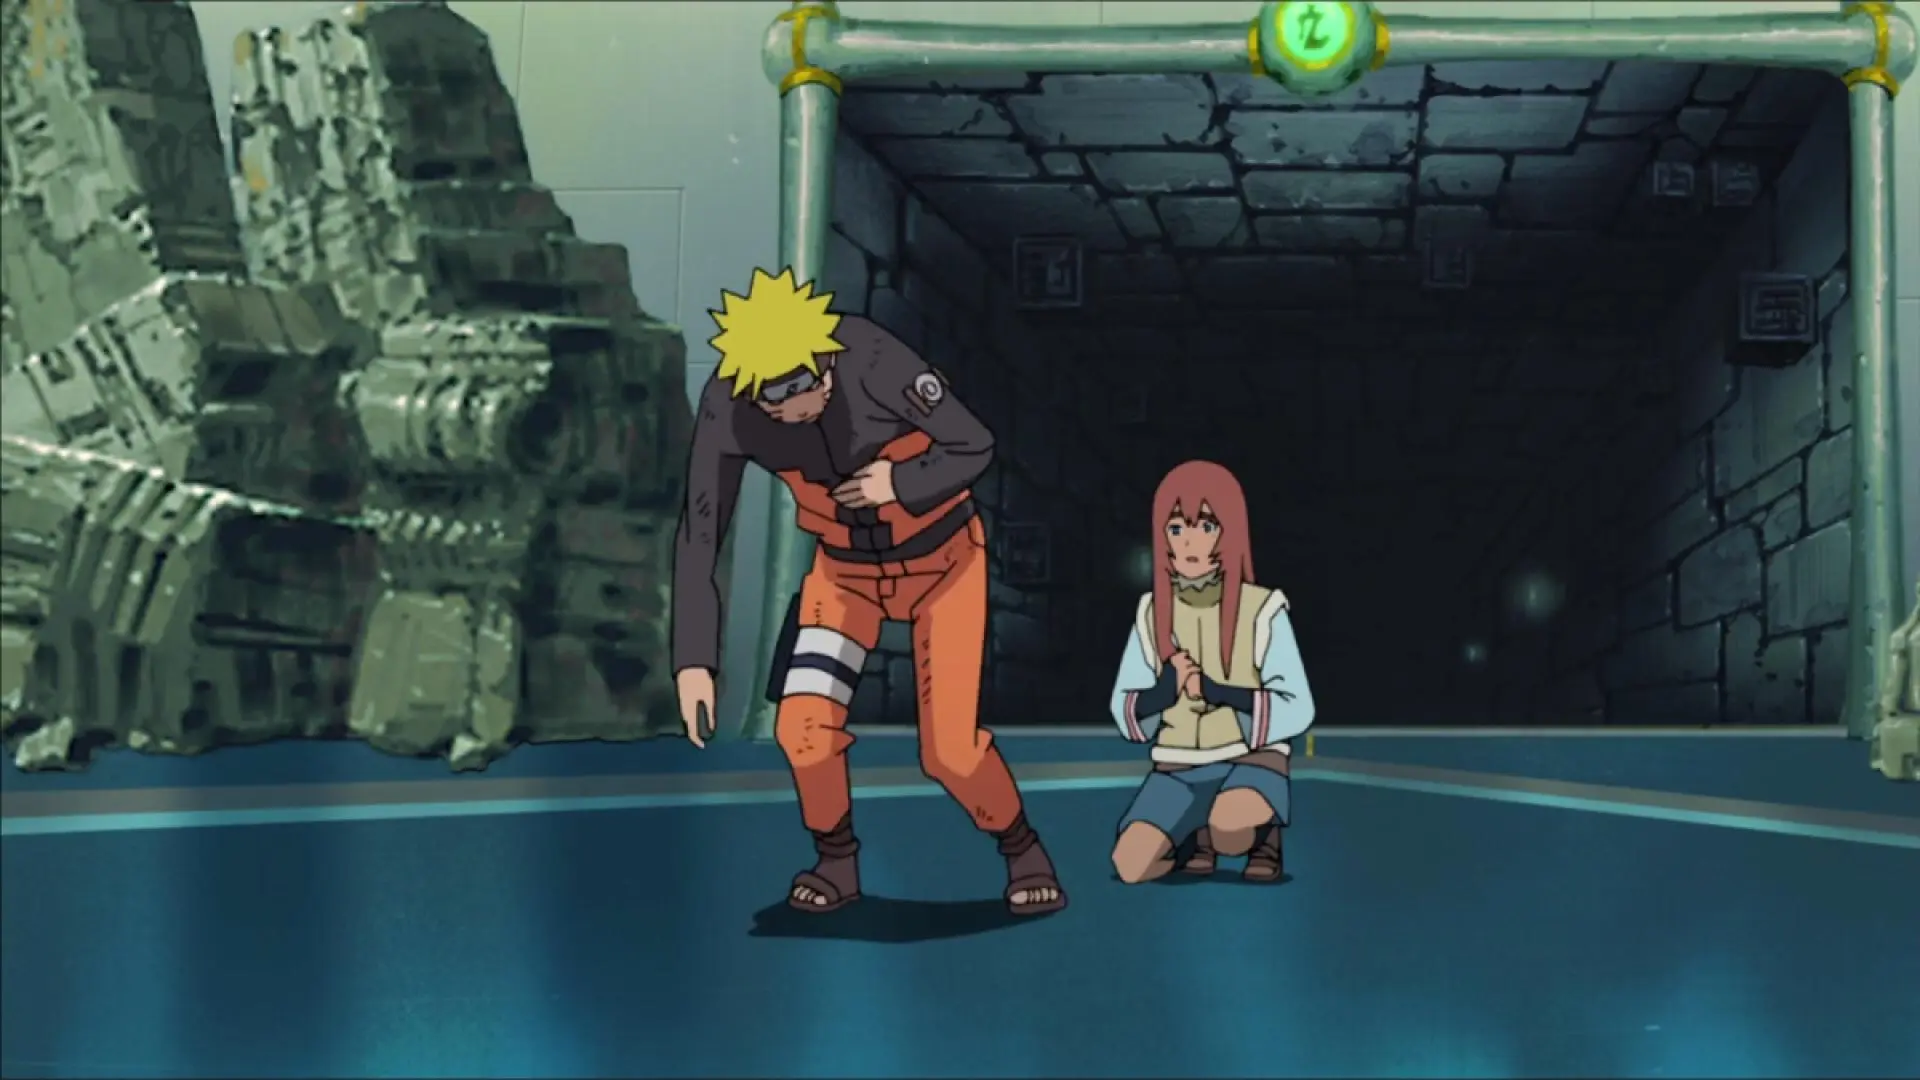 Naruto wounded in the movie Bonds